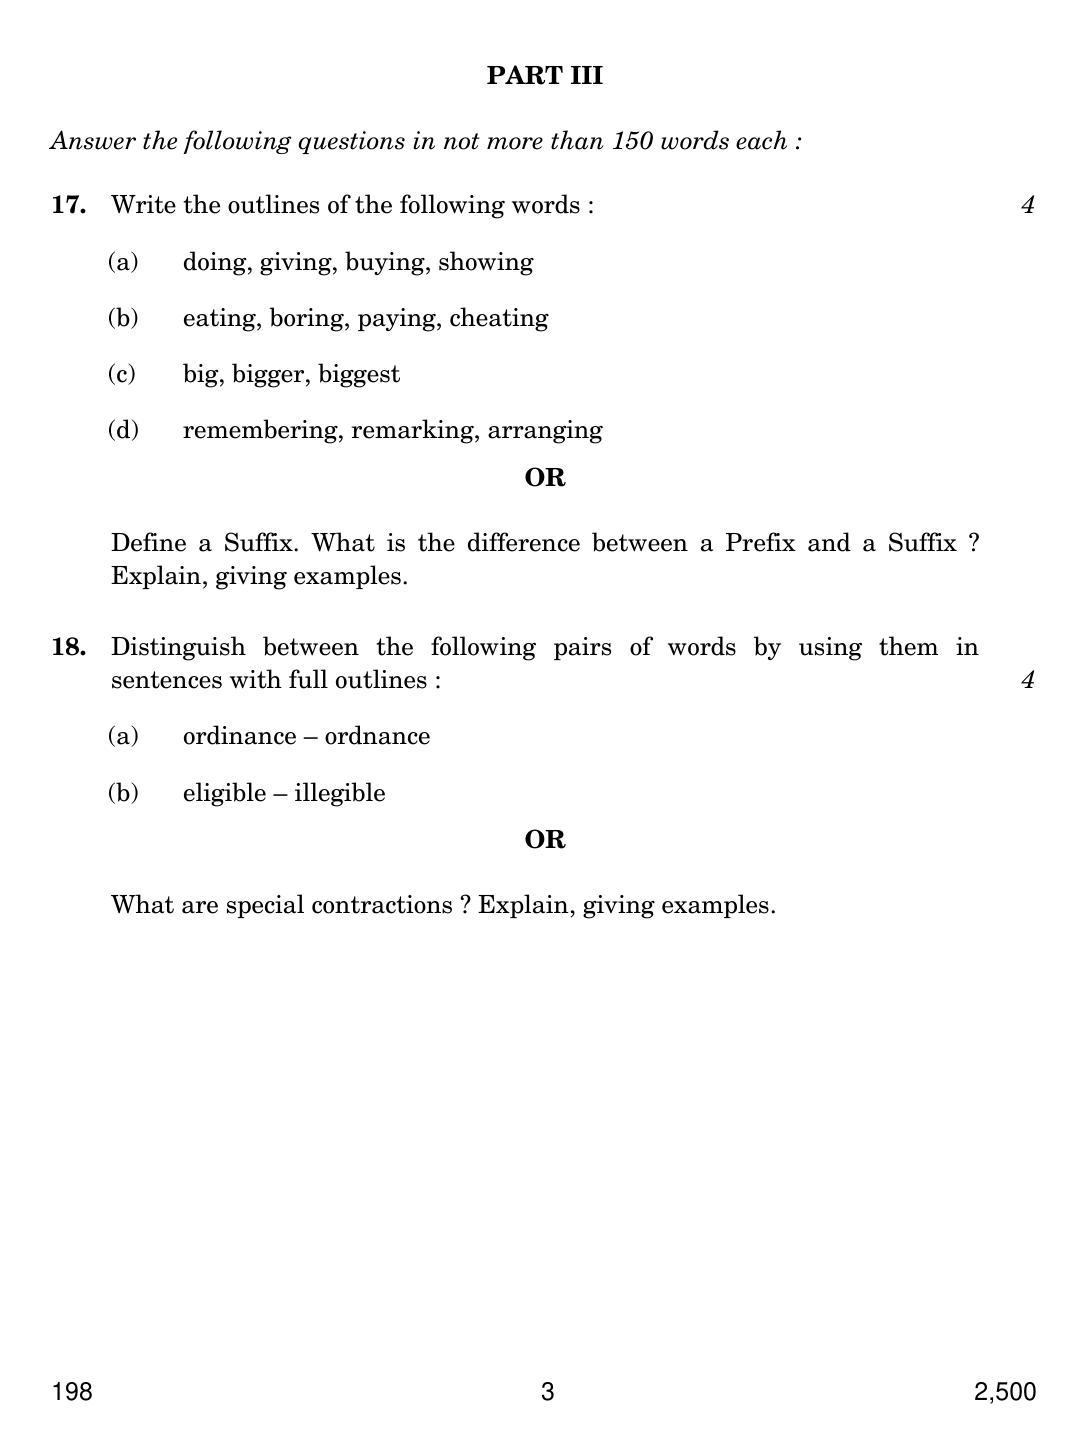 CBSE Class 12 198 SHORTHAND ENGLISH 2018 Question Paper - Page 3